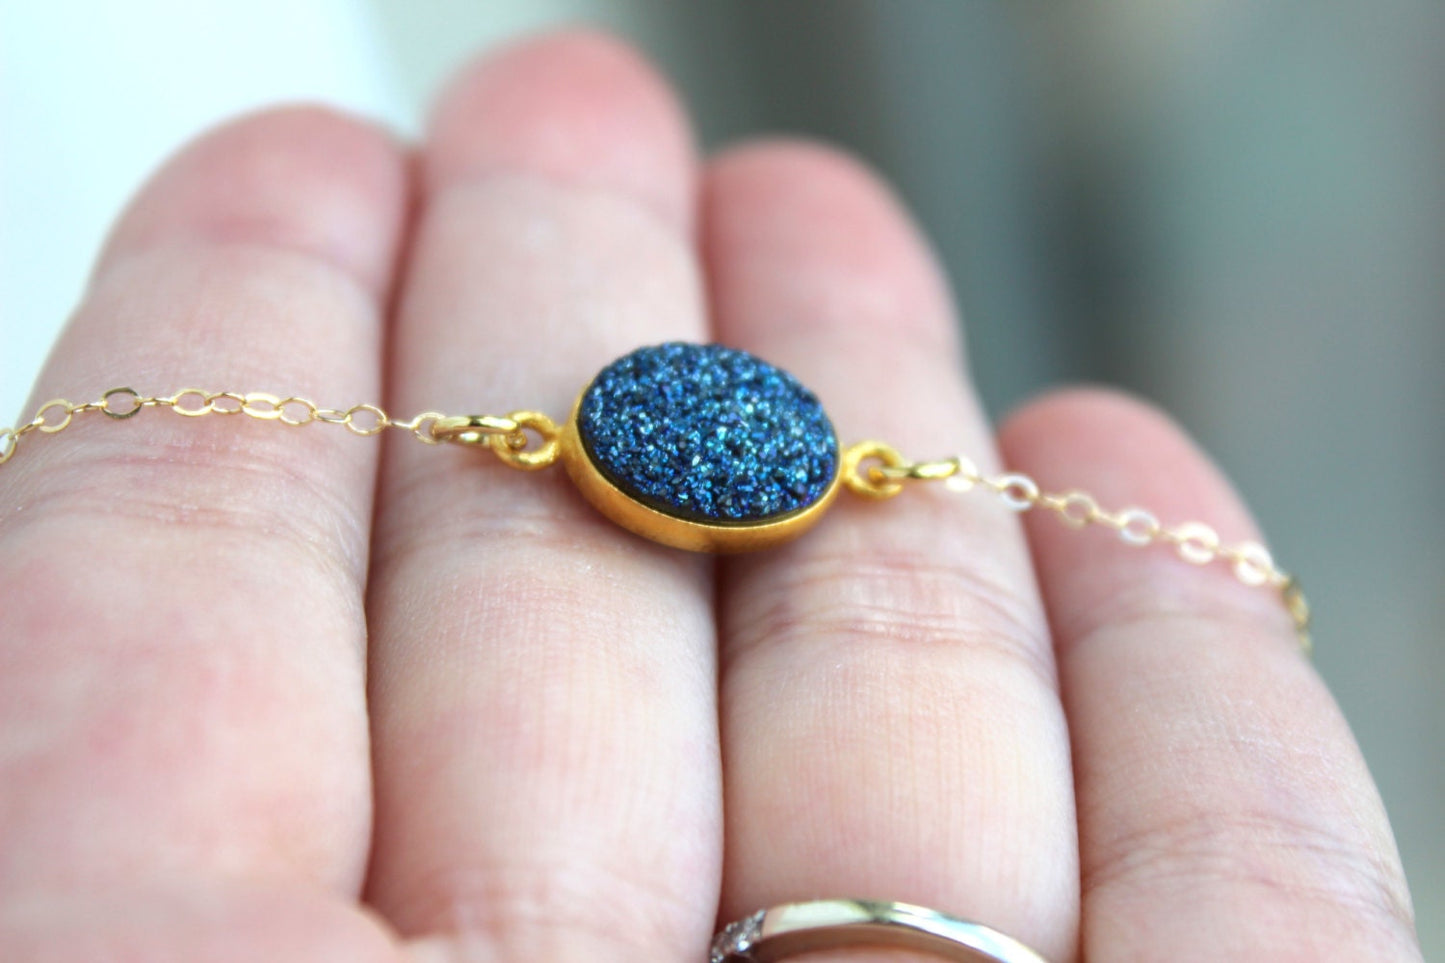 Gold Blue Druzy Necklace Natural Druzy Jewelry - Gold Blue Drusy Necklace Jewelry Druzy Christmas Gift Under 20 Necklace Statement Jewelry